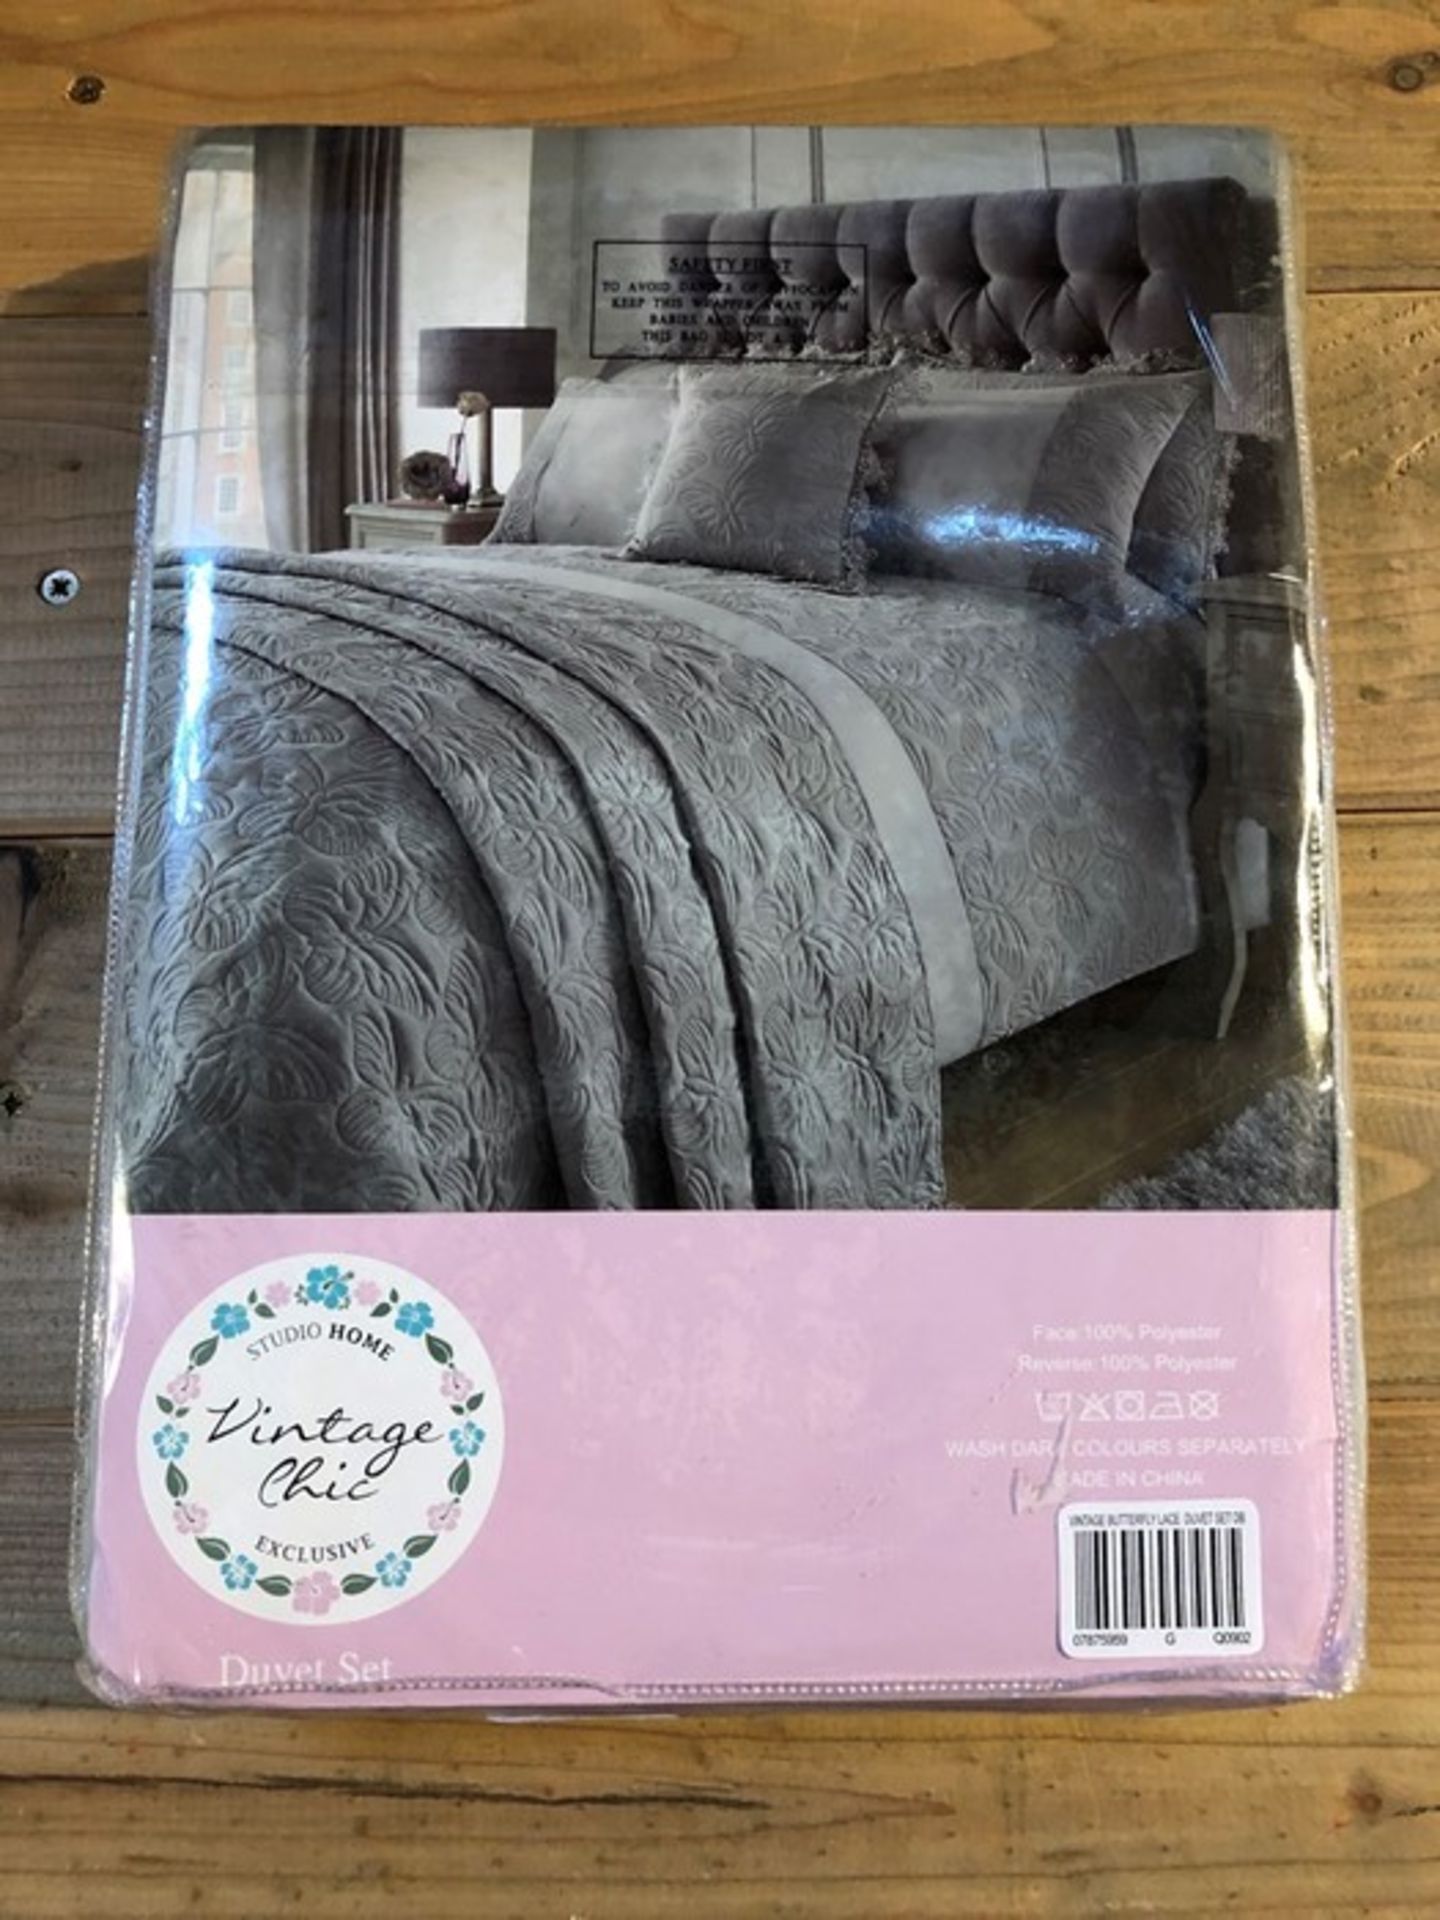 1 BAGGED VINTAGE BUTTERFLY LACE DUVET SET IN GREY / SIZE DOUBLE (PUBLIC VIEWING AVAILABLE) - Image 2 of 3